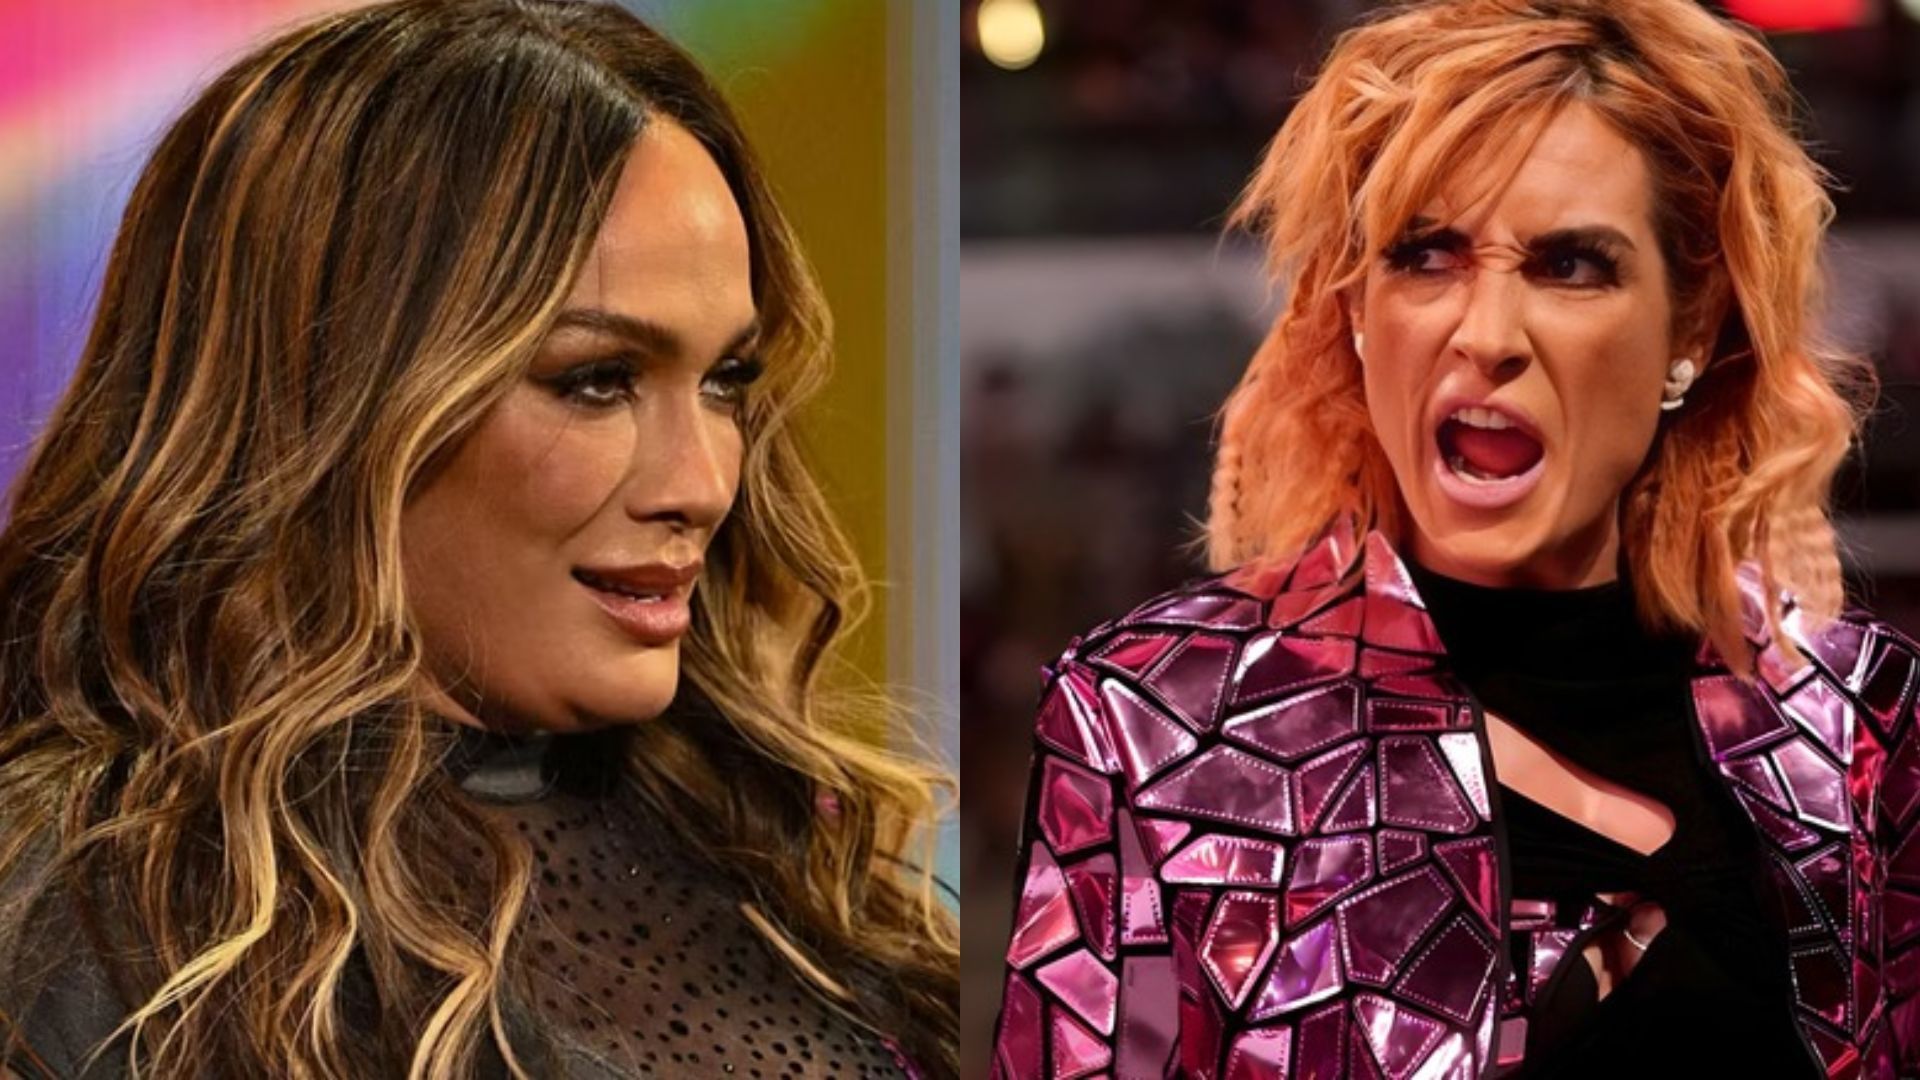 Nia Jax and Becky Lynch have reignited their rivalry